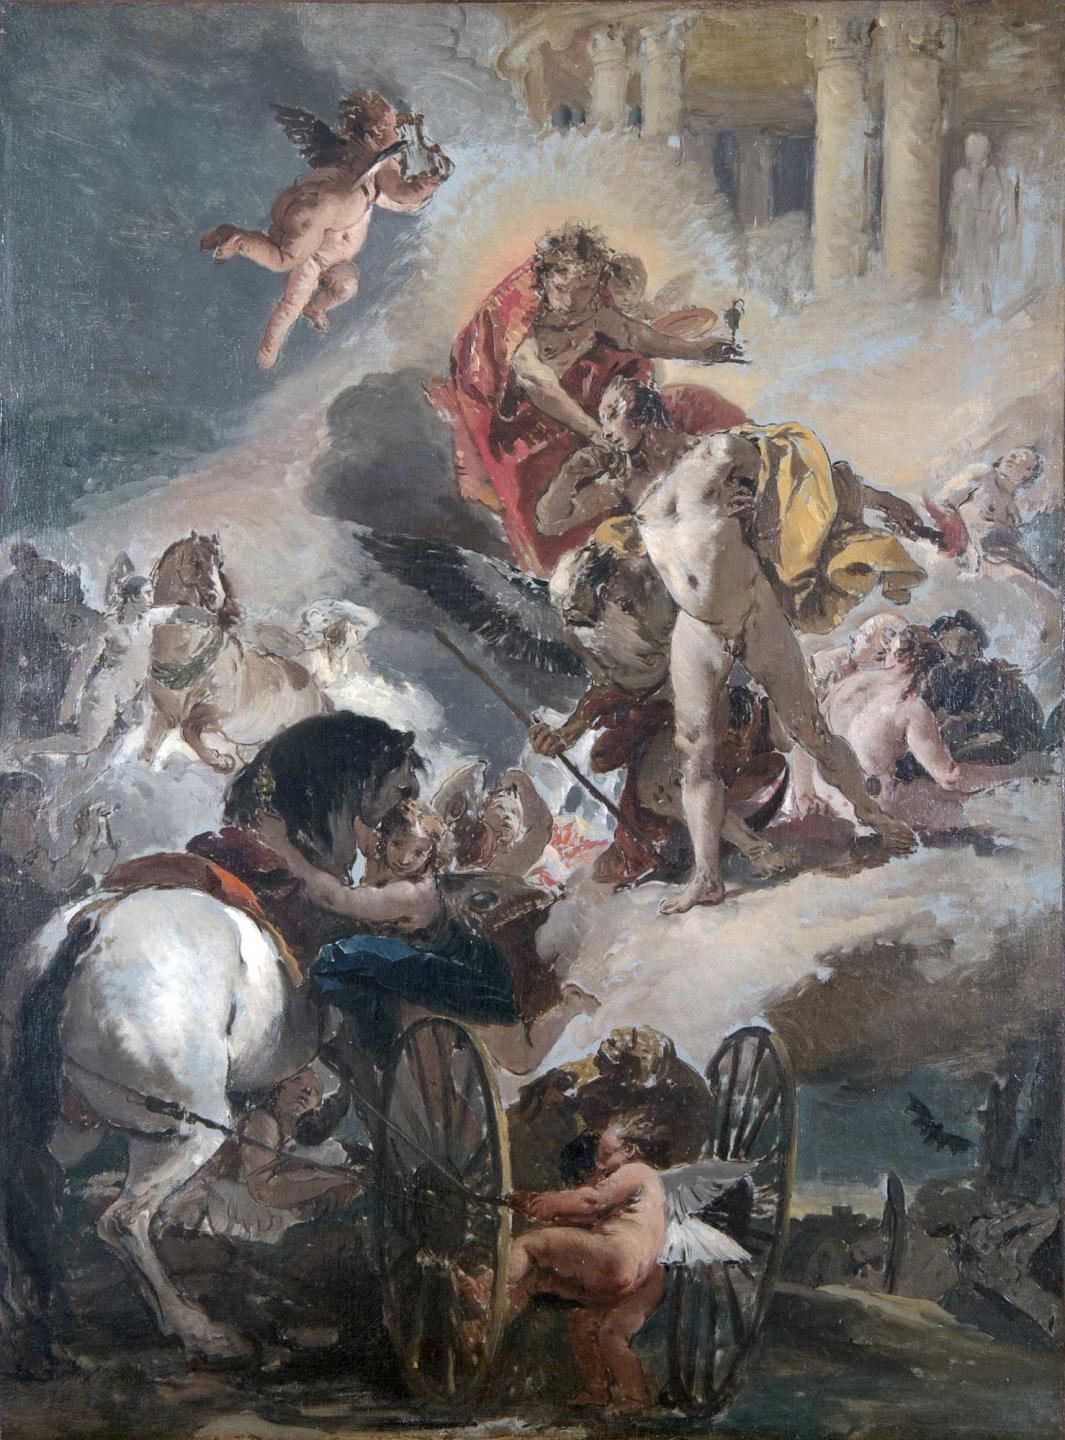 Study for a fresco cycle depicting Apollo and Phaethon.